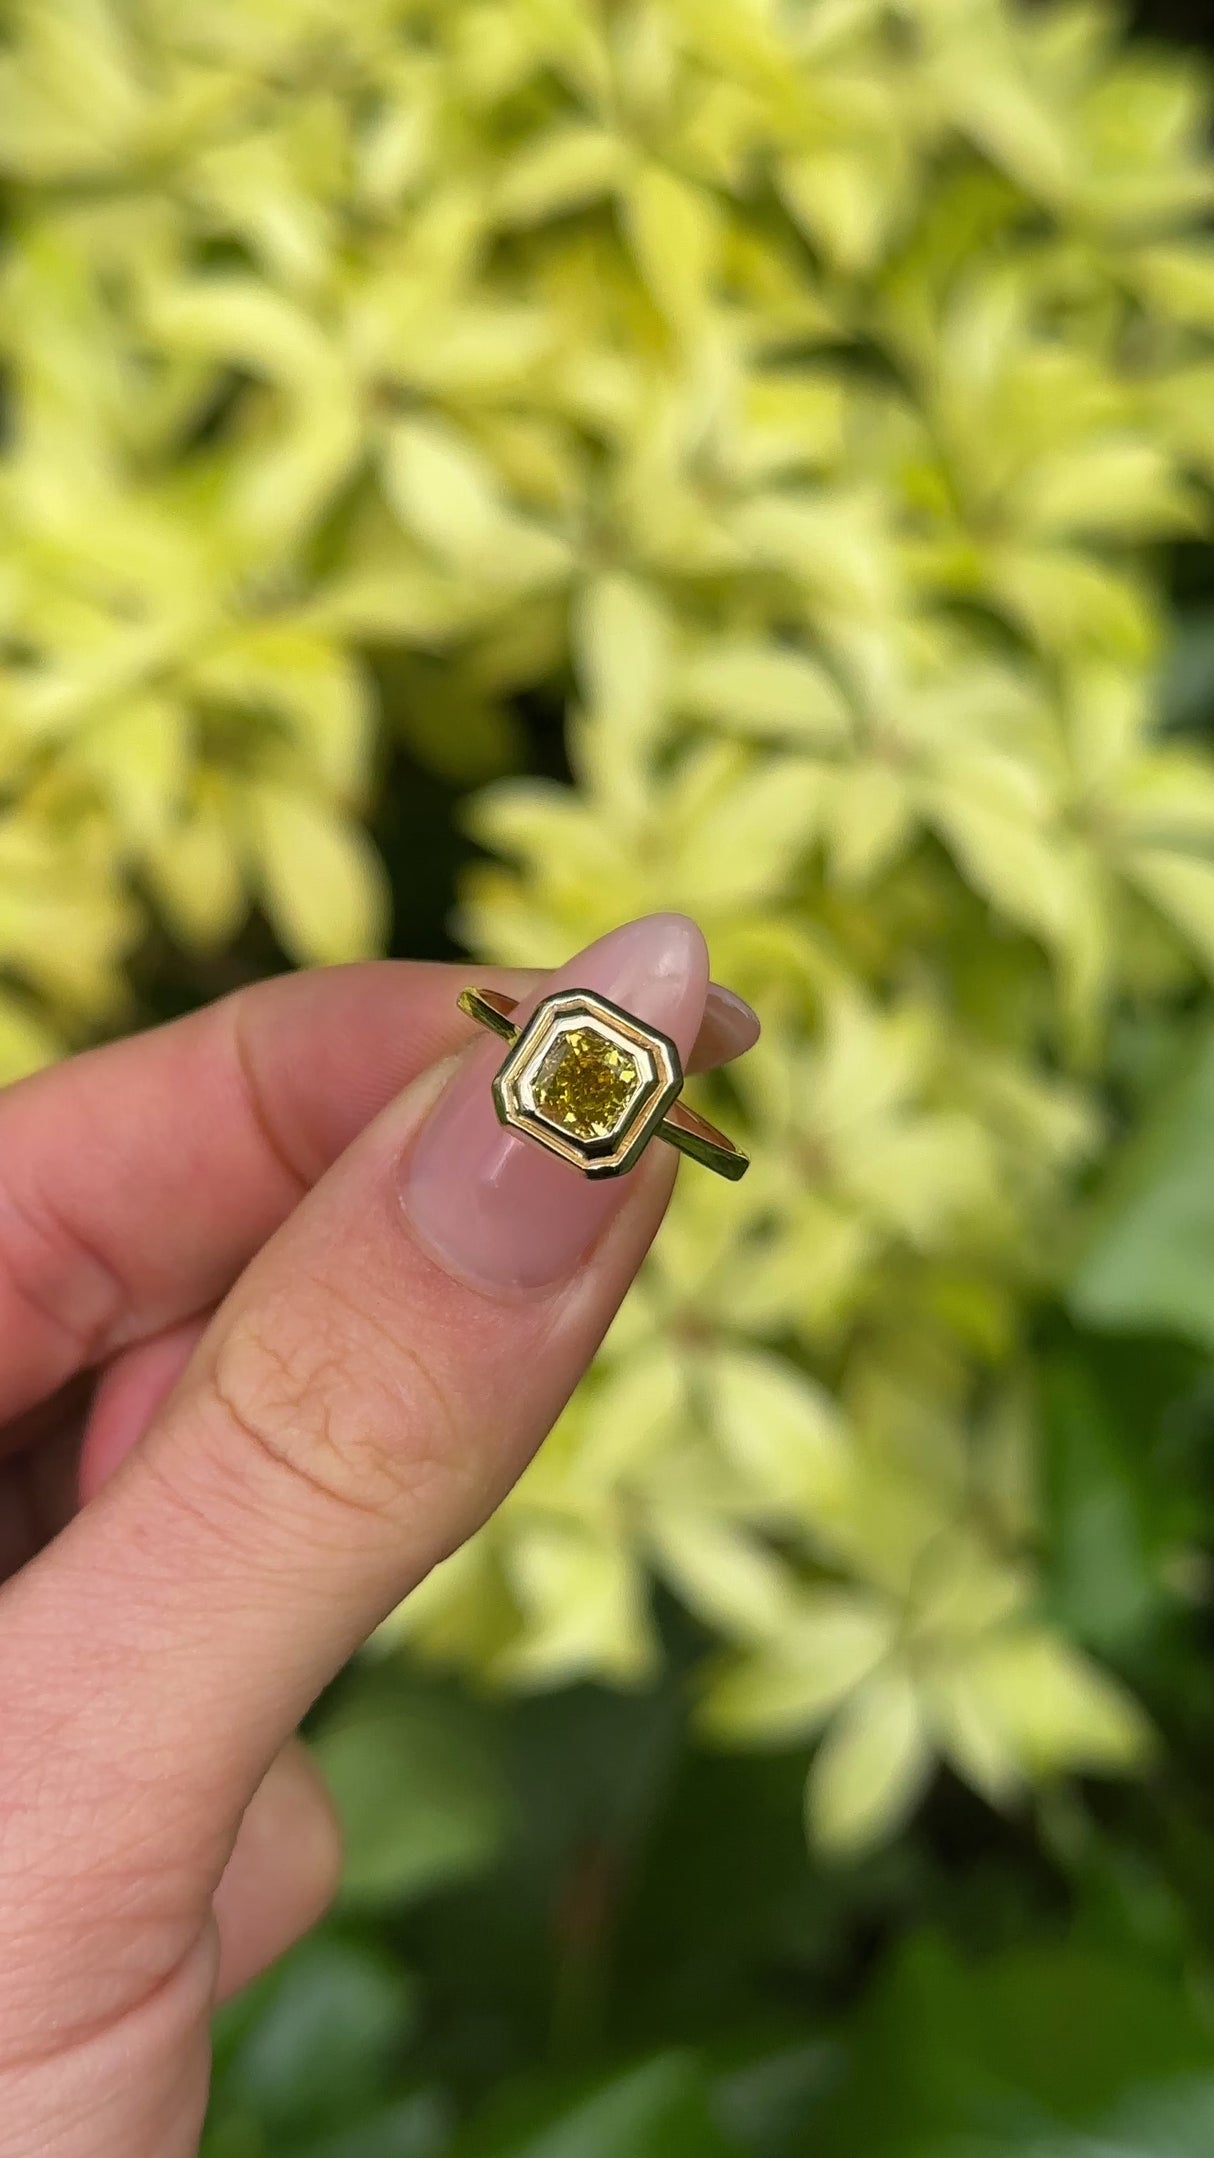 Vintage, Solitaire Yellow Diamond Ring, 14ct Yellow and White Gold worn on hand.